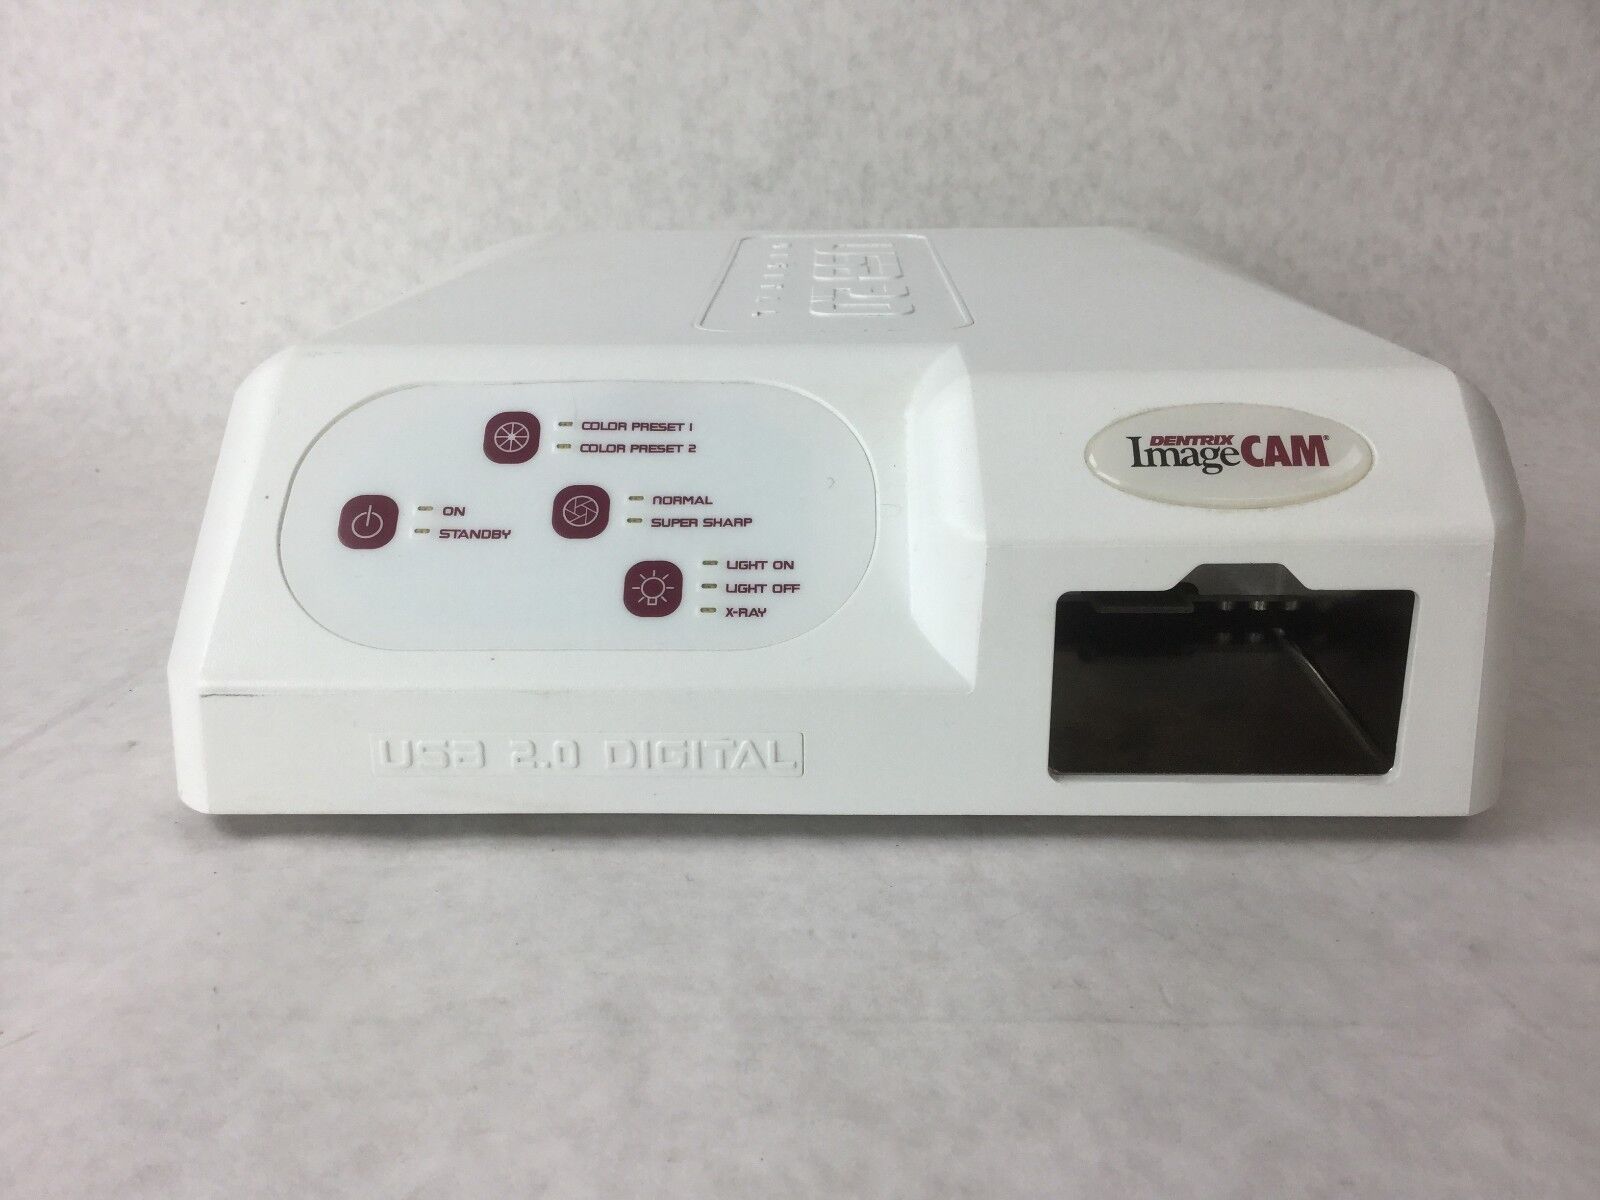 Dentrix Image Cam, DCAS5, USB 2.0 Digital, Powers on but Untested